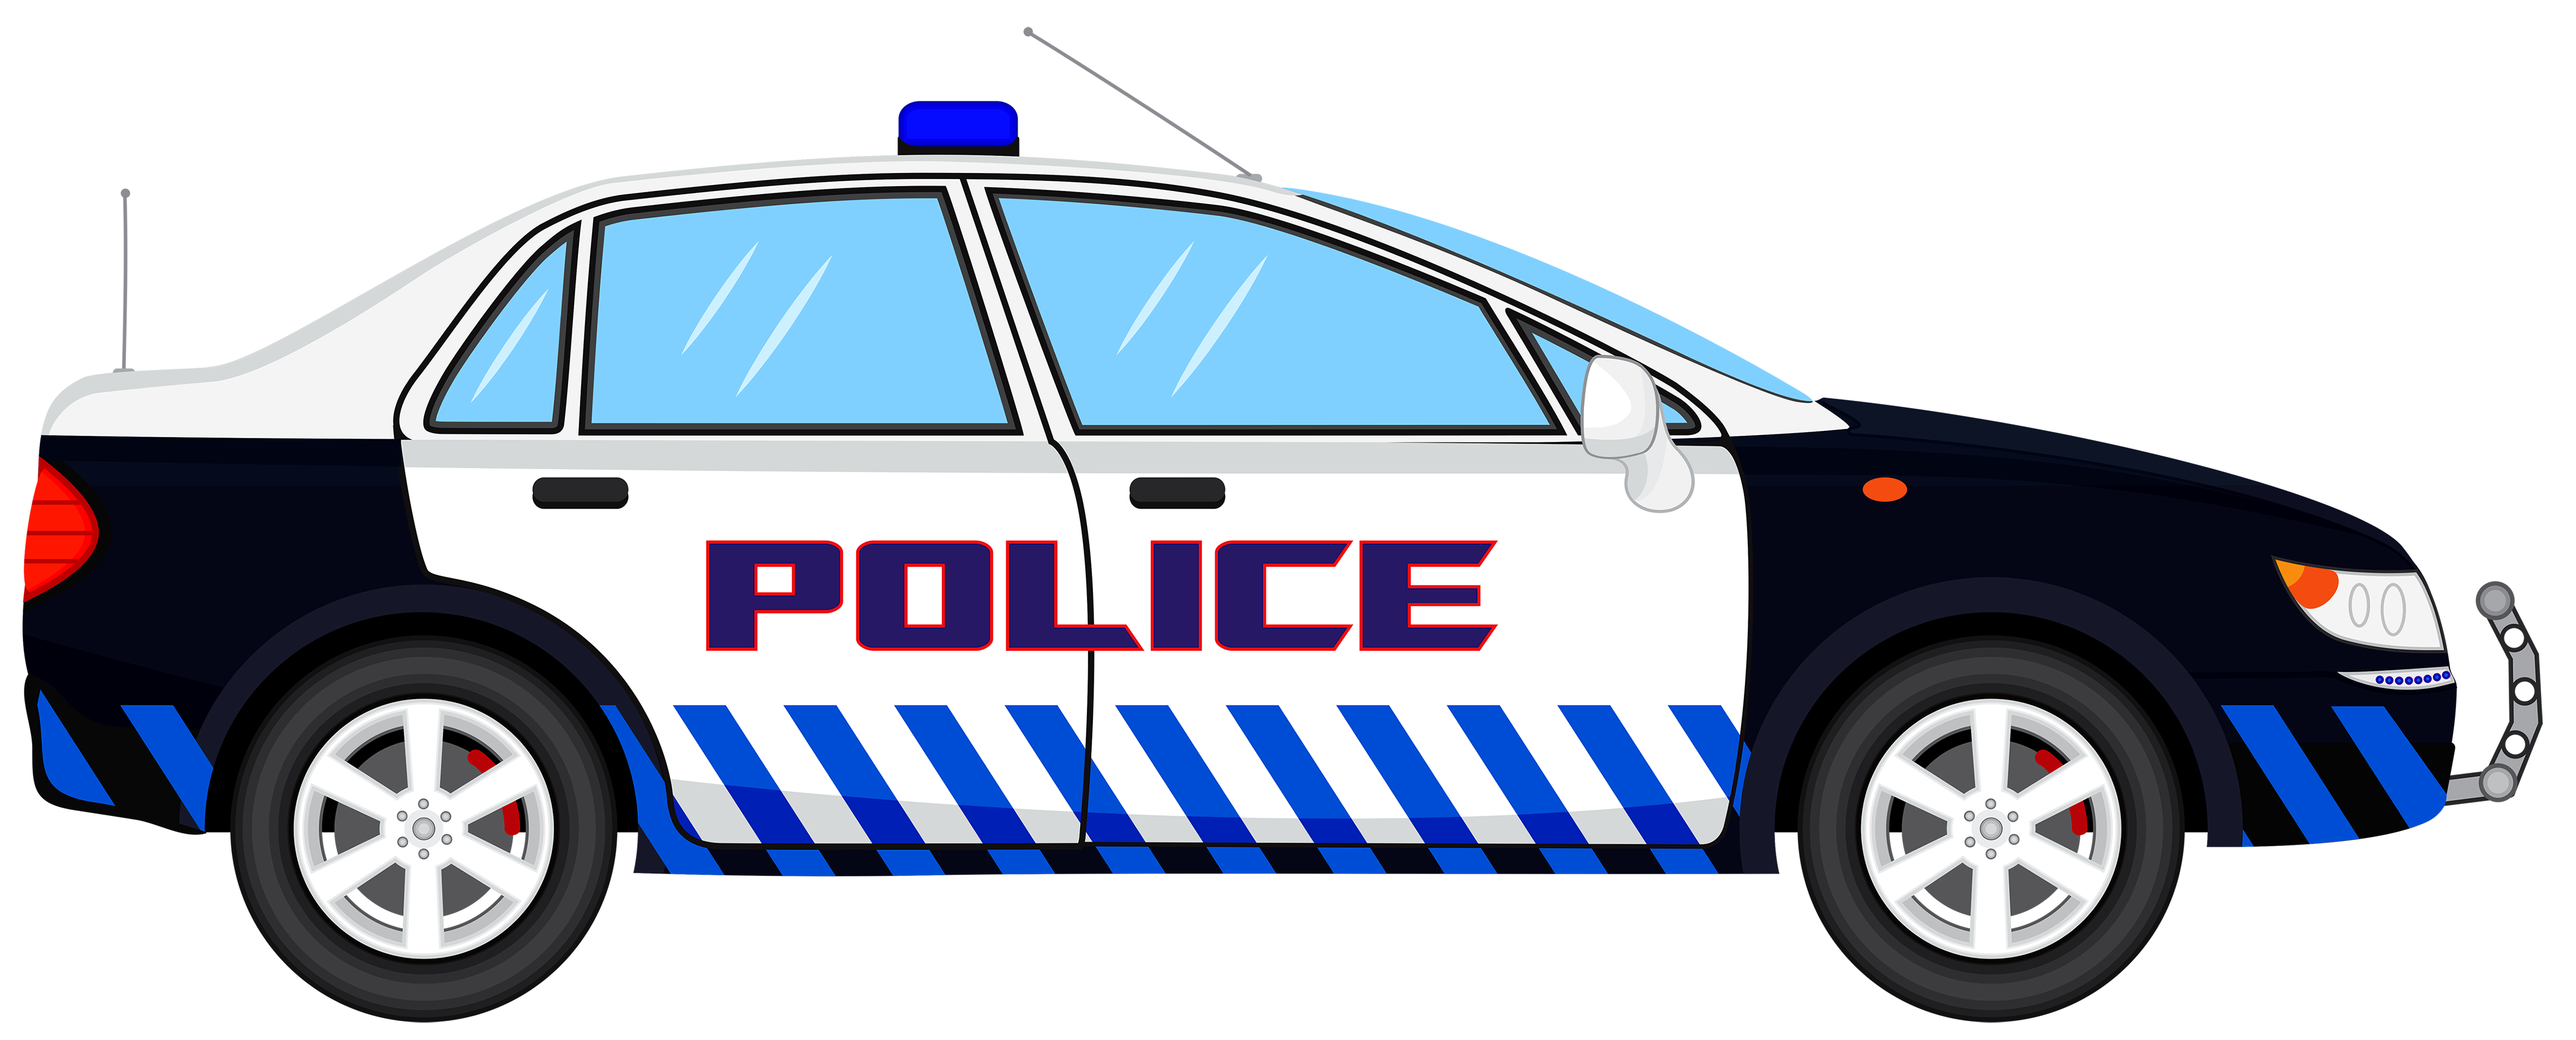 police car clipart images - photo #7